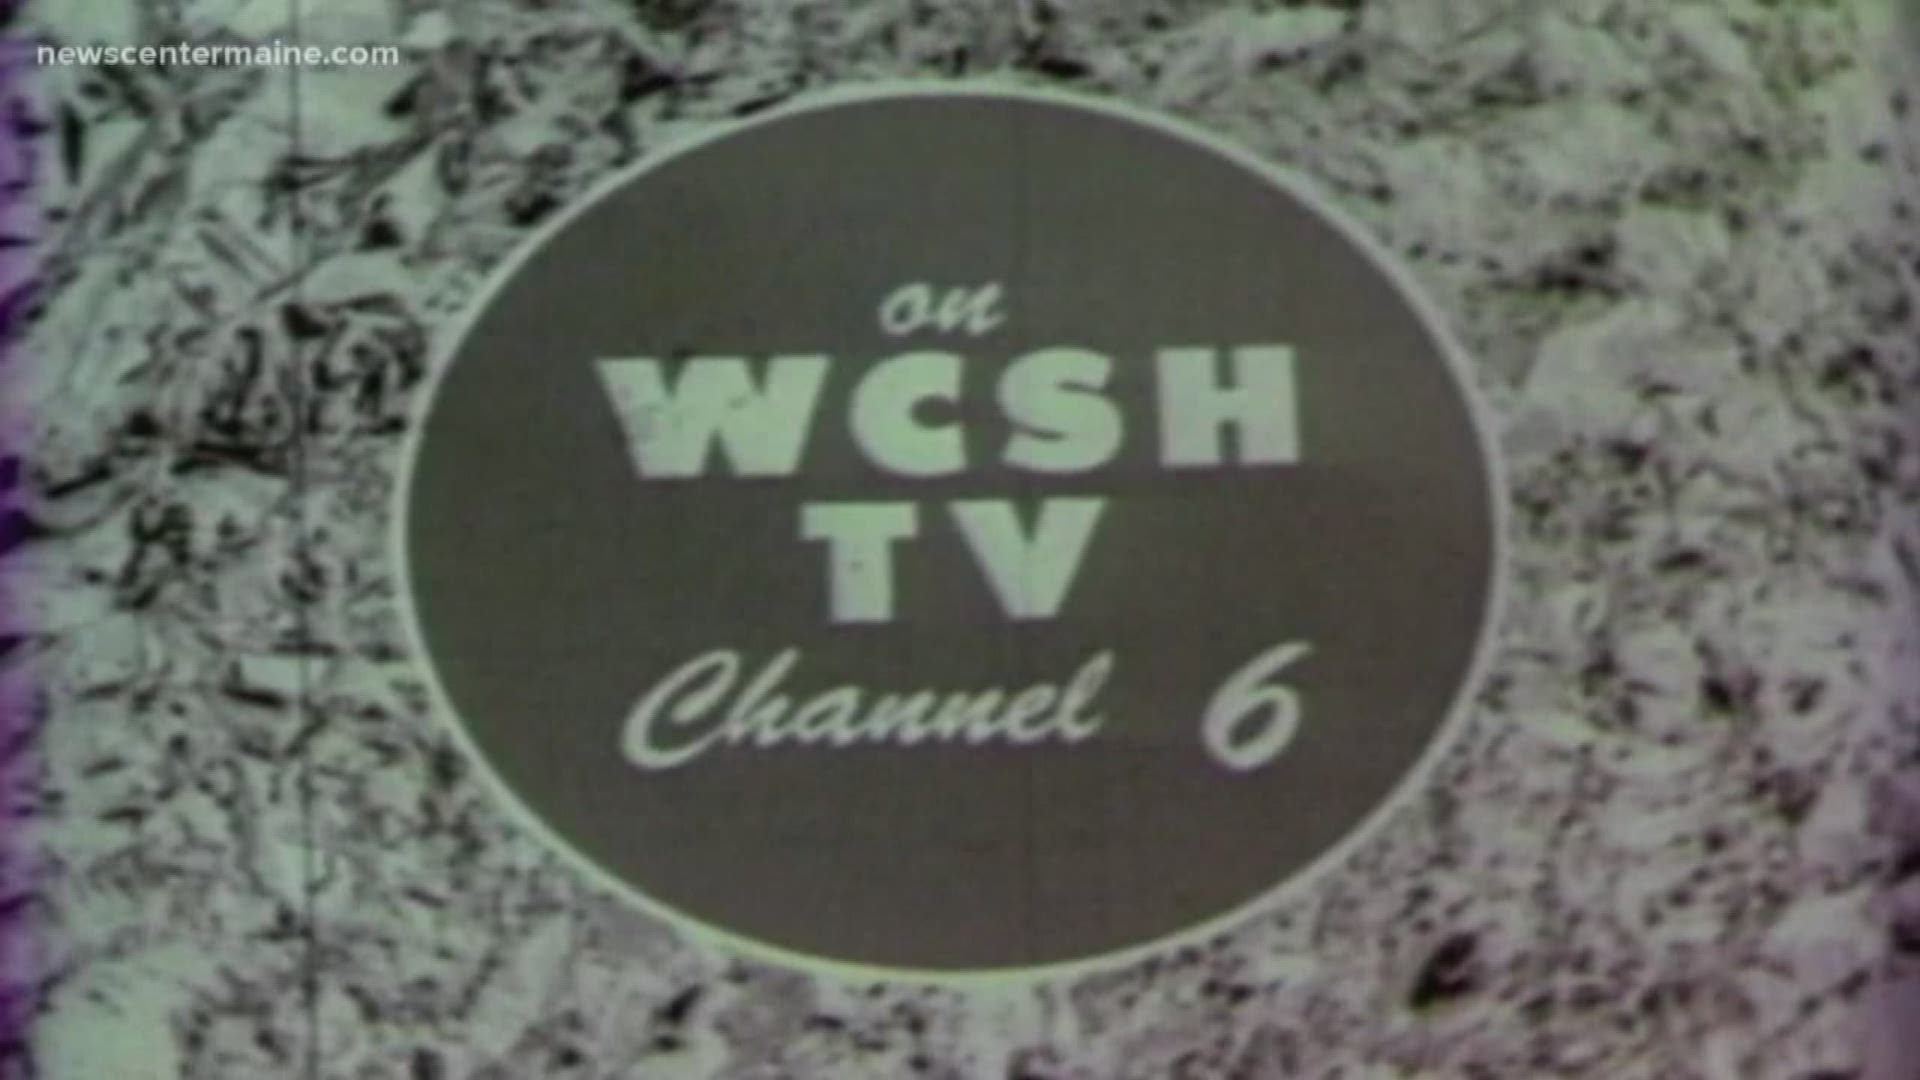 WCSH signed on December 20, 1953, from studios at the Congress Square Hotel in downtown Portland. The station was owned by the Rines family through their Maine Broadcasting System; the family had built the hotel in 1896, and established WCSH radio (970 AM, now WZAN) on the top floor in 1925.